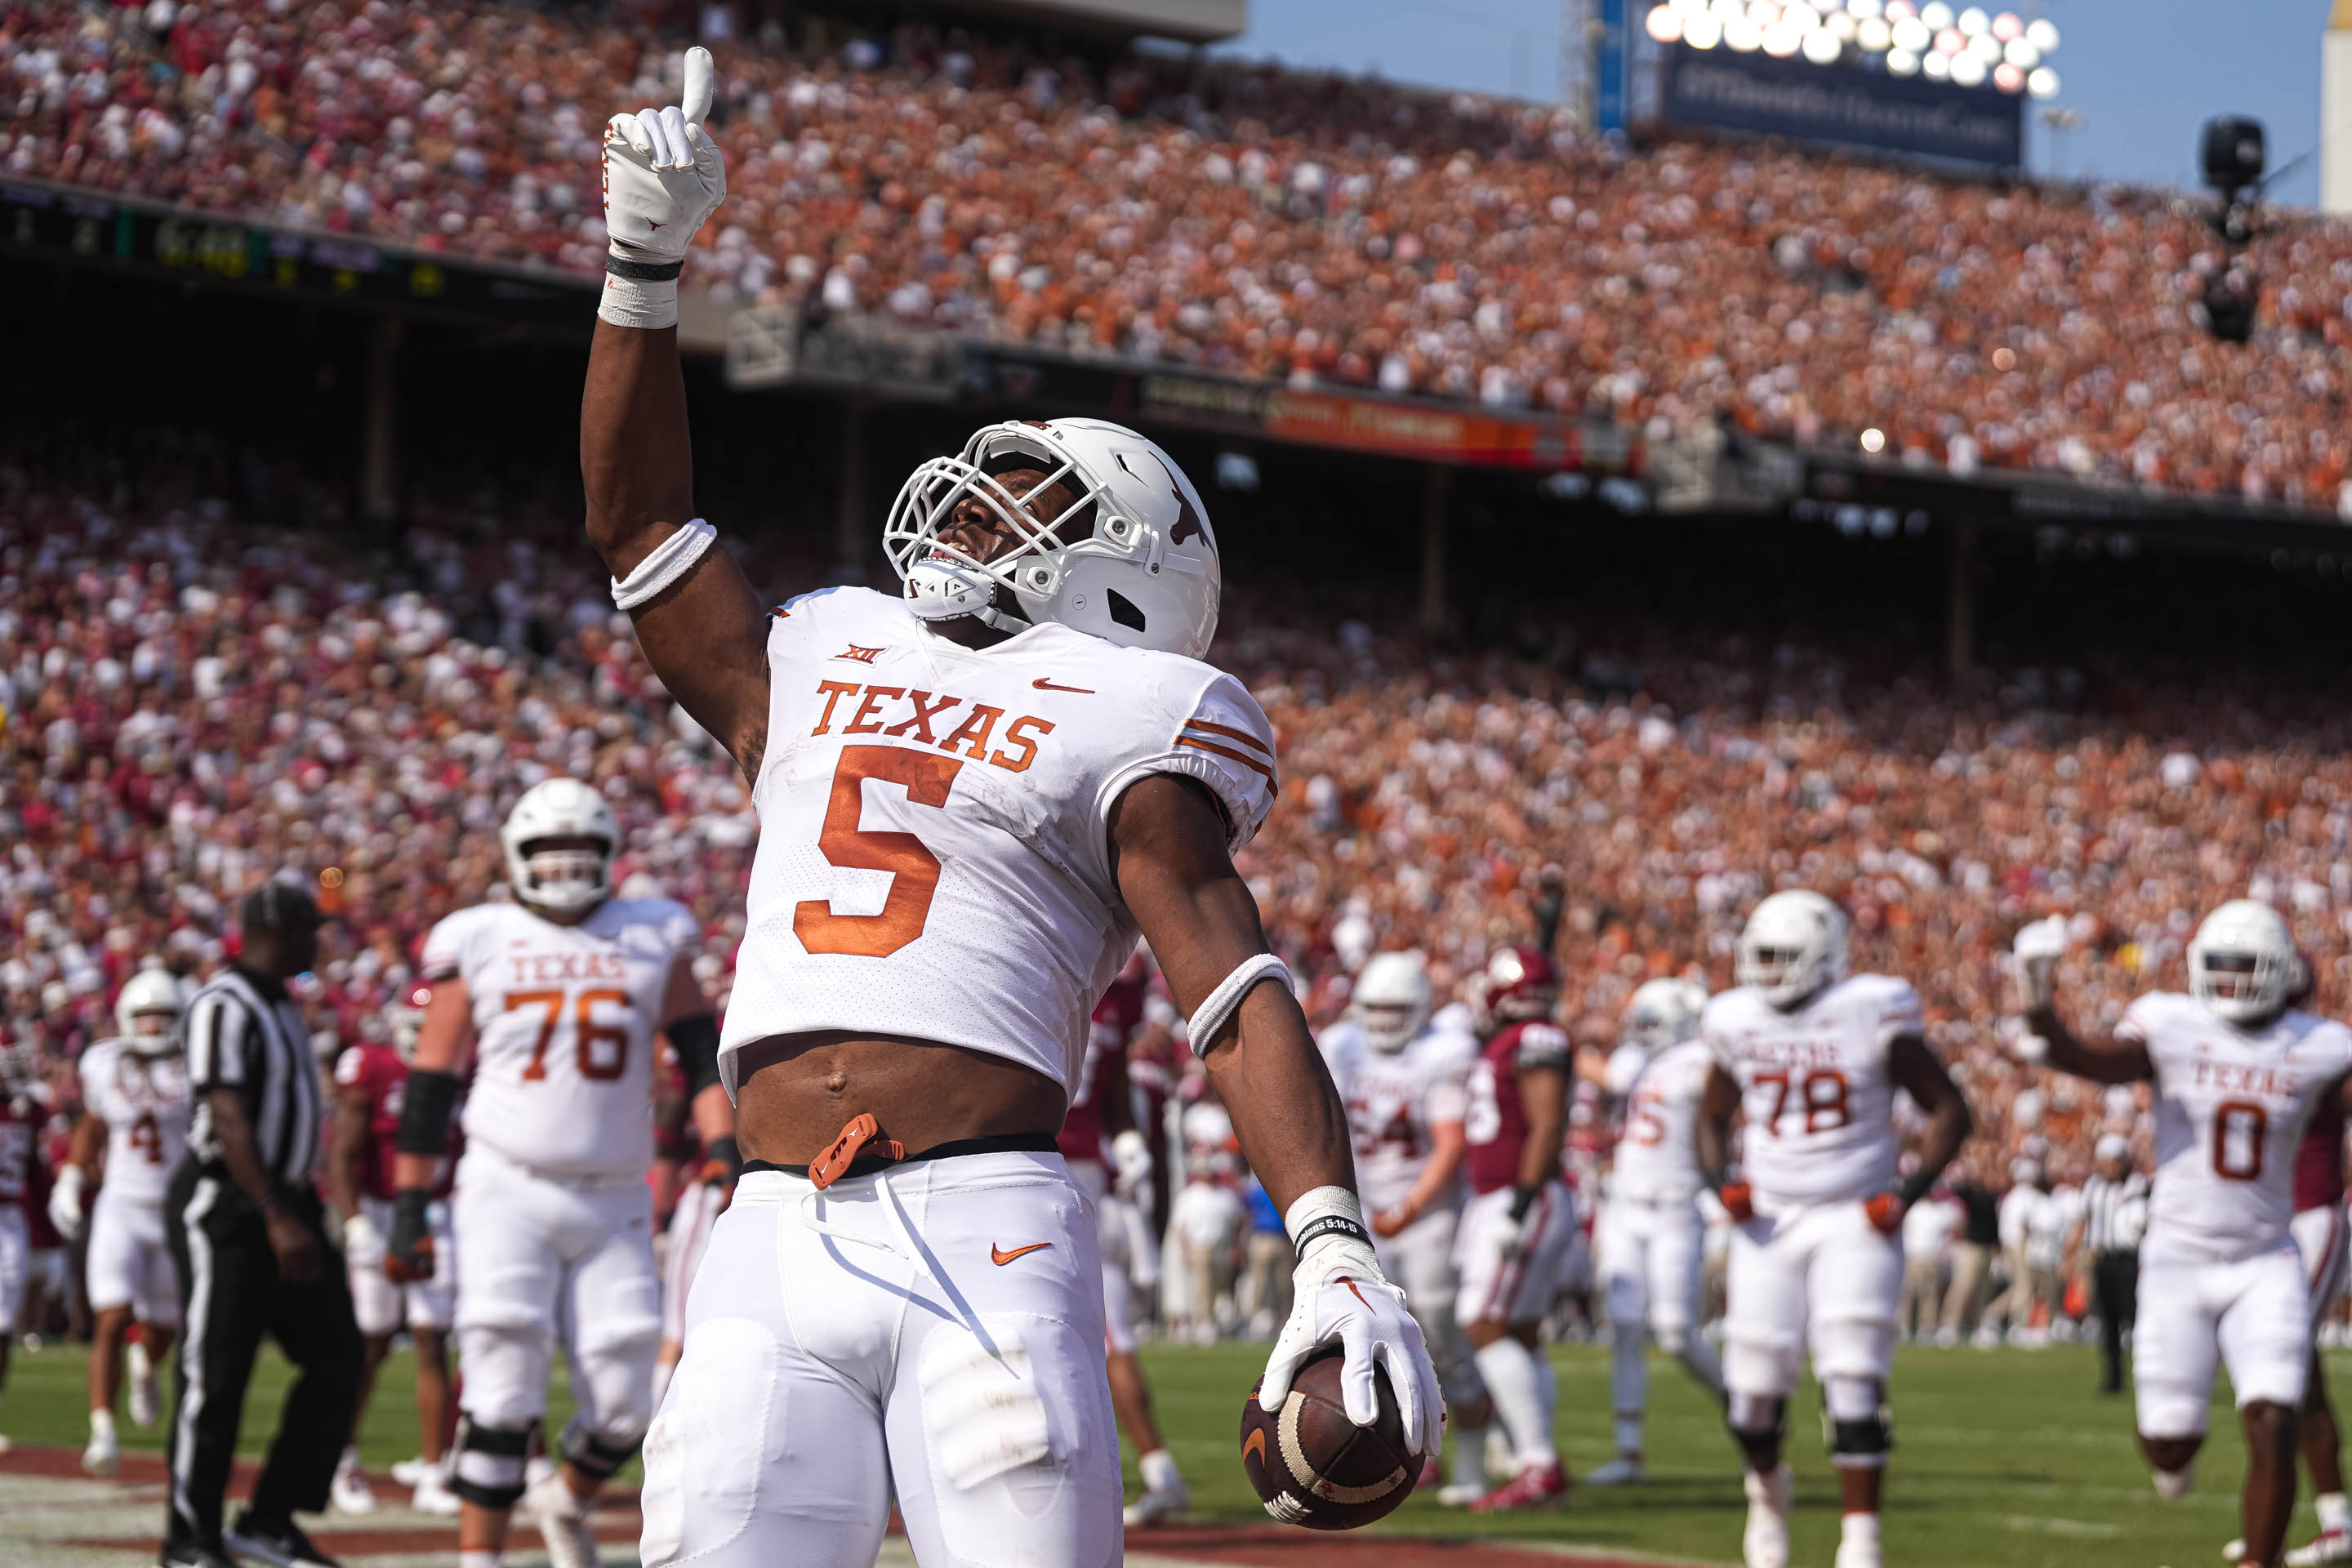 Texas running back Bijan Robinson (5) celebrates a touchdown during the annual Red River Showdown against Oklahoma at the Cotton Bowl in Dallas, Texas on Oct. 8, 2022. Aem Tx Vs Ou 21. © Aaron Martinez/American-Statesman / USA TODAY NETWORK